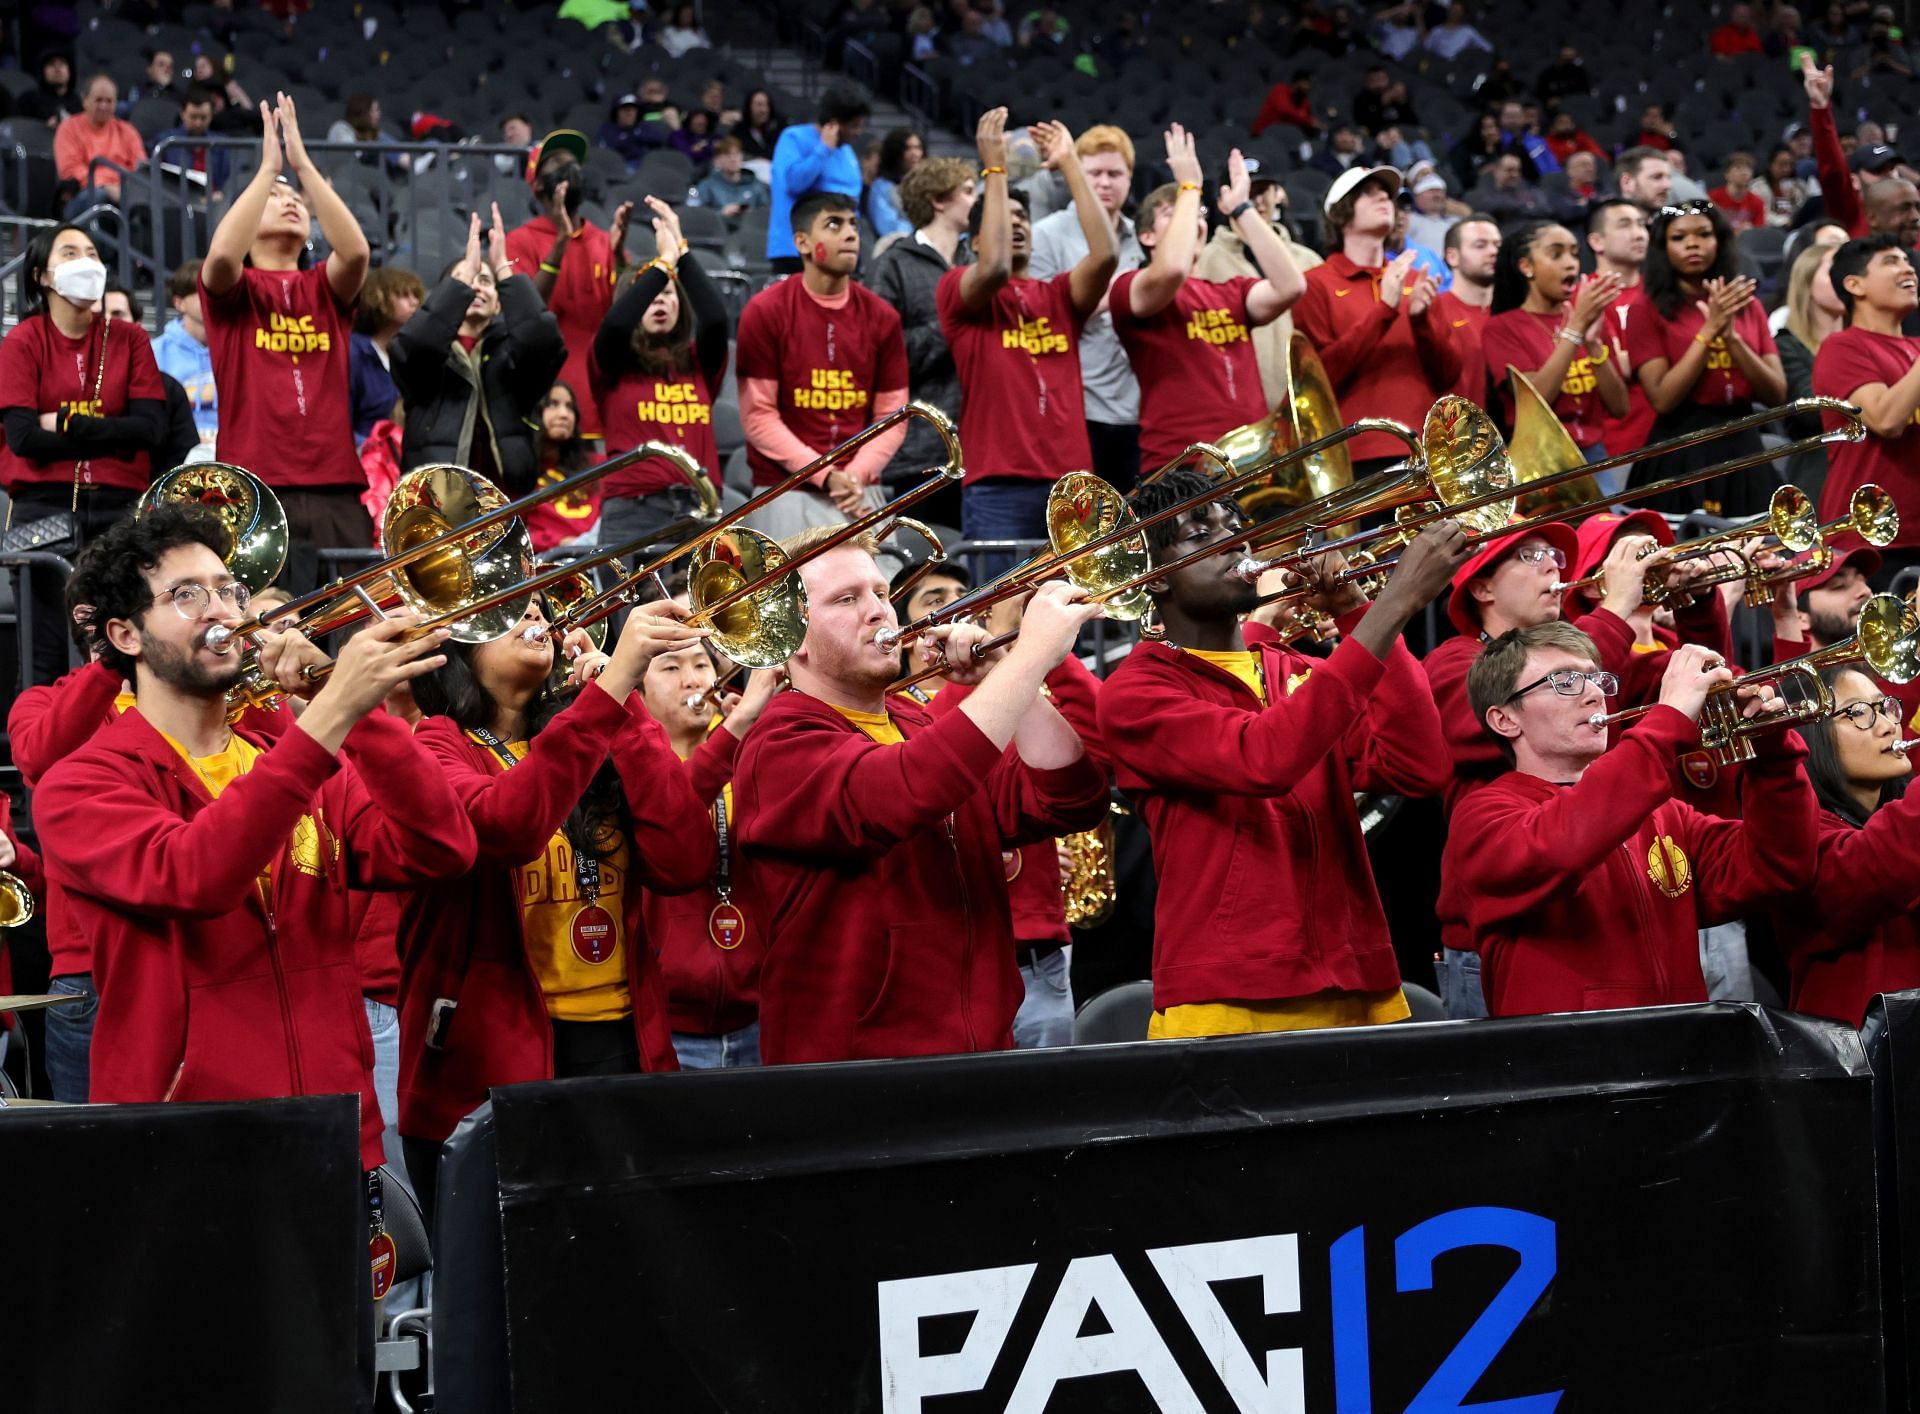 Trojans band performs as the team takes on the UCLA Bruins during the Pac-12 Conference basketball tournament semifinals